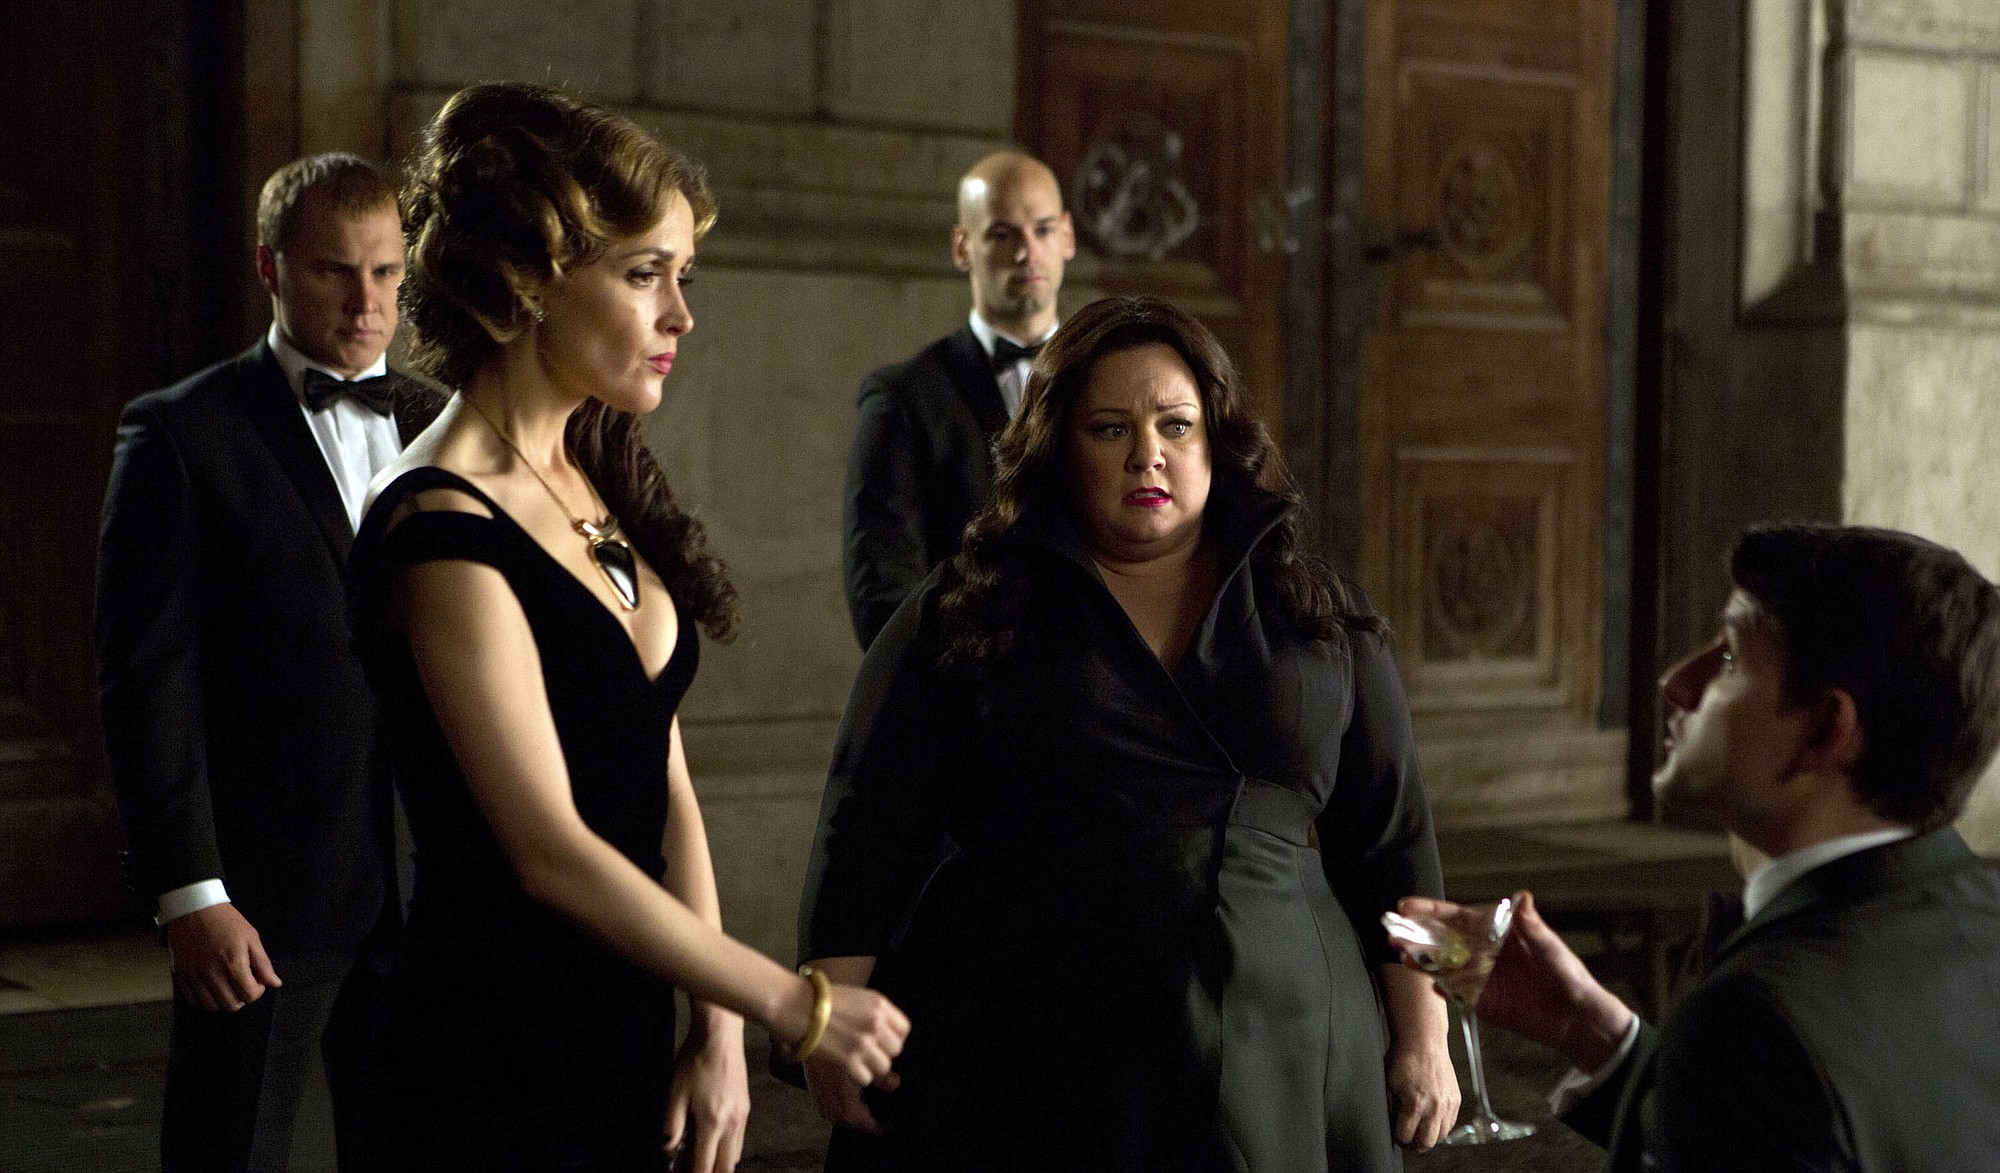 Melissa McCarthy, second from right, infiltrates an arms dealing ring led by Rose Byrne, left, in &quot;Spy.&quot;